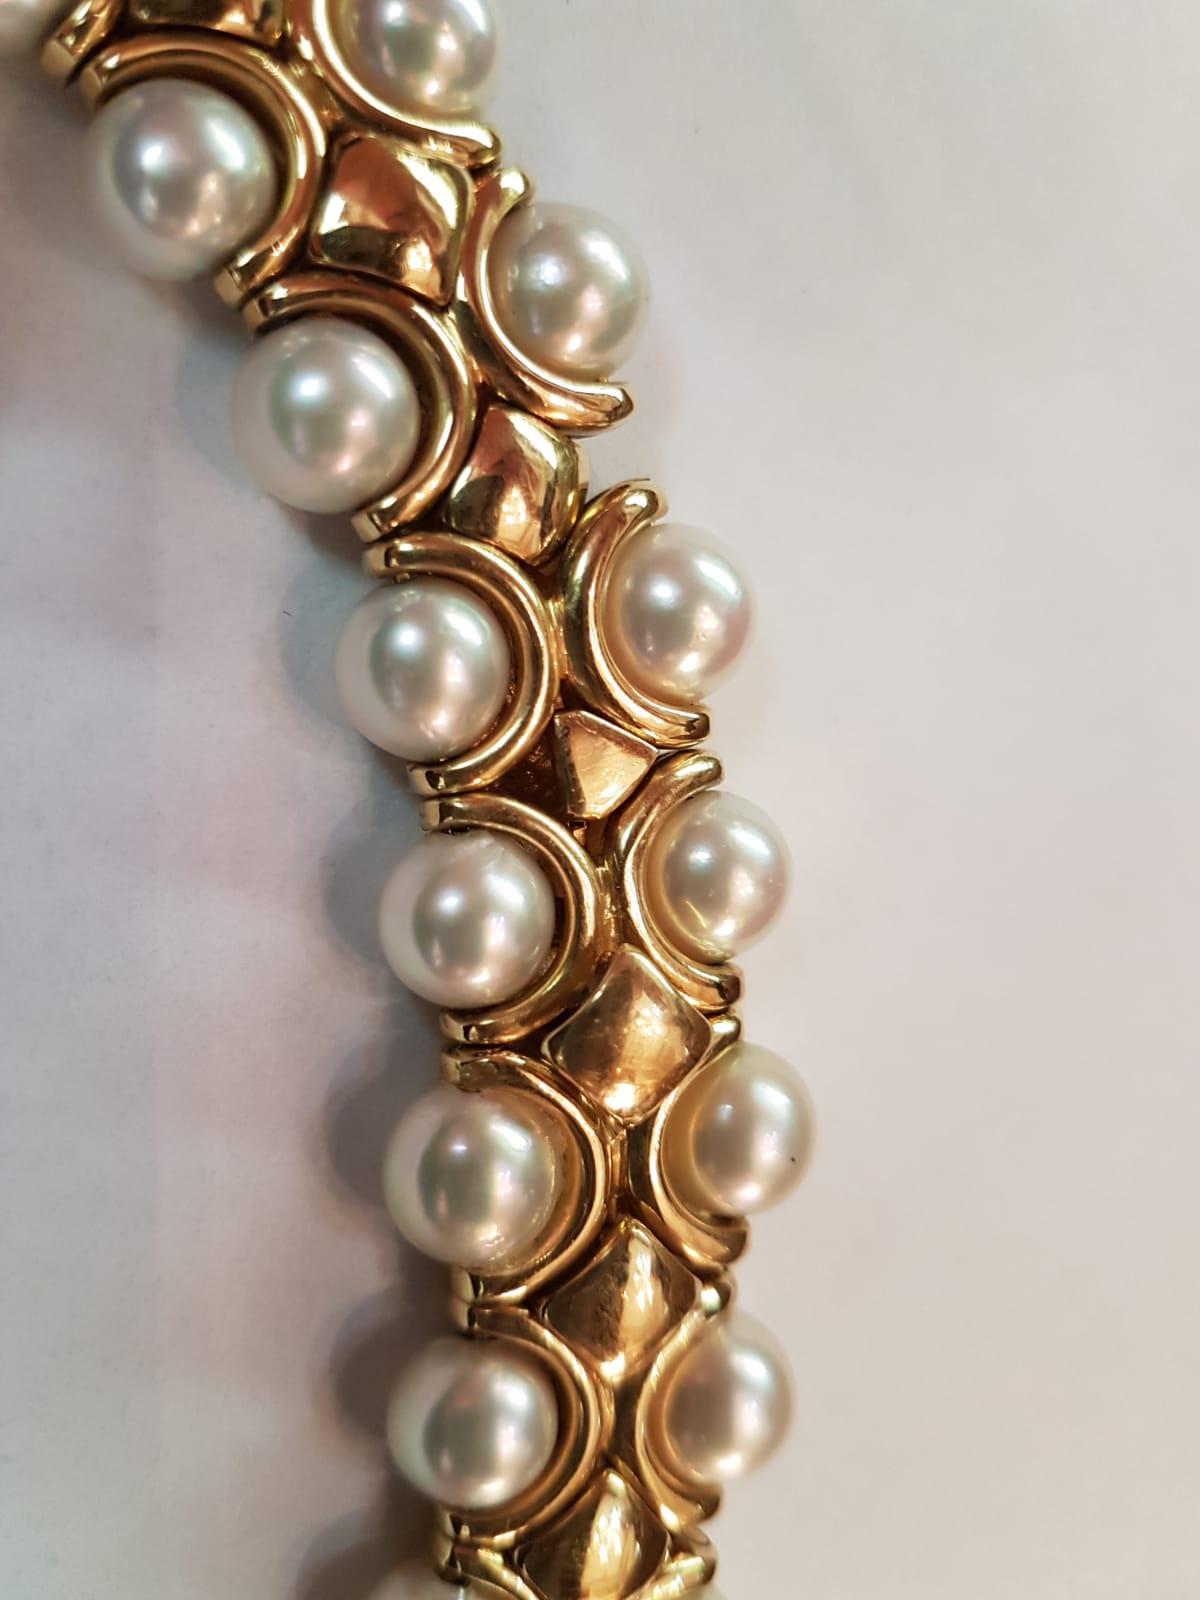 This Fantastic Choker Necklace Features Oriental Pearls of 7mm Diameter in a Unique 18Kt Yellow Gold Setting. This is a very elegant understated necklace.


